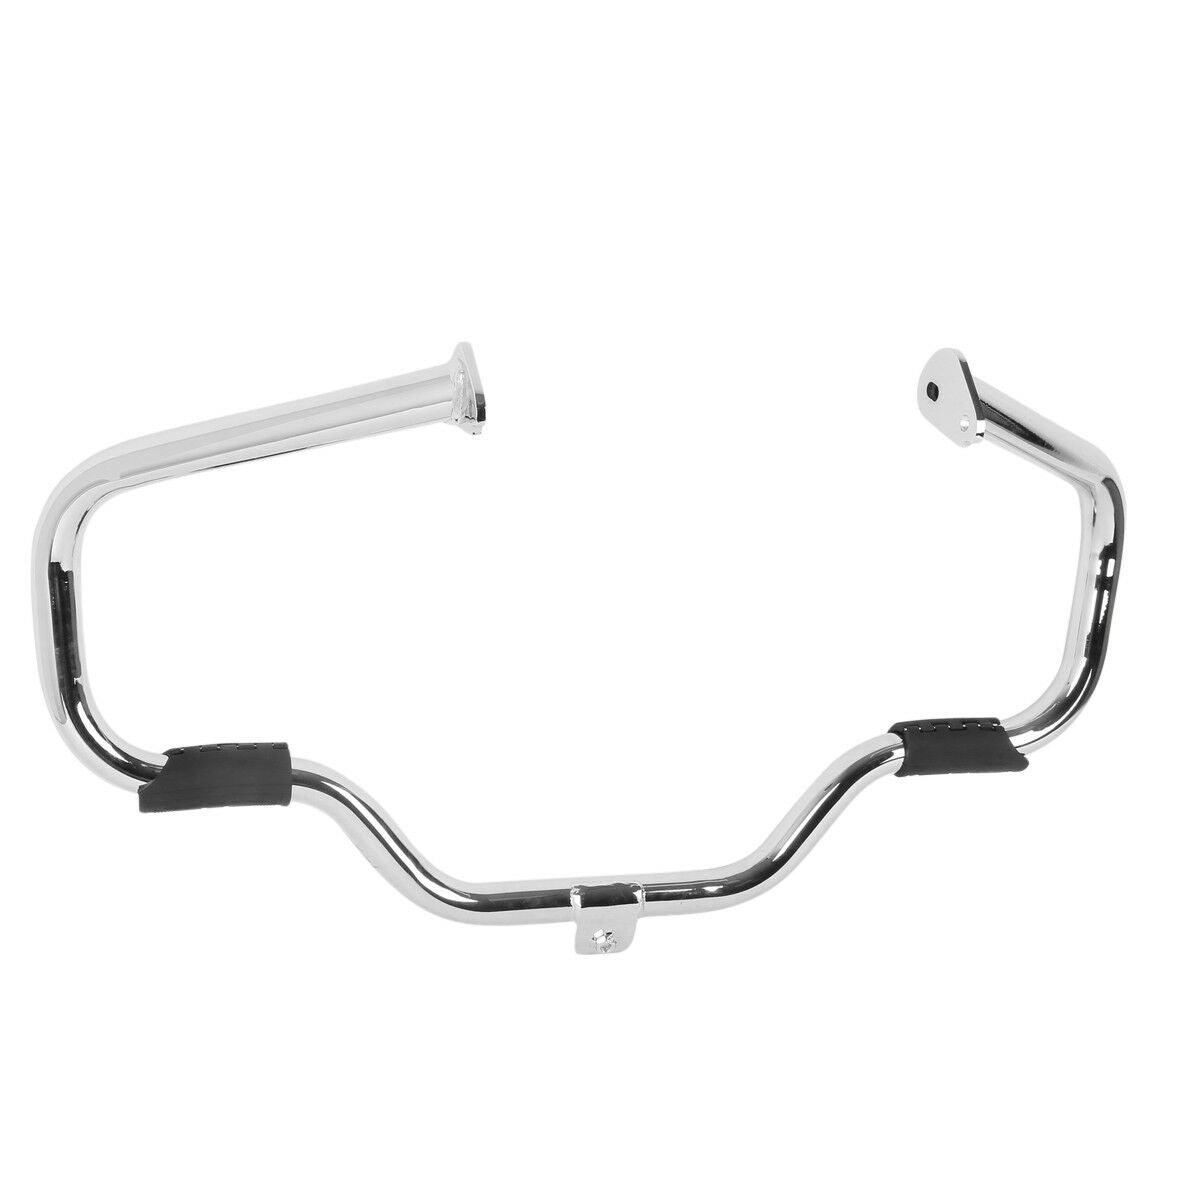 Chrome Mustache Engine Guard Crash Bar Fit For Harley Touring Road Glide 97-08 - Moto Life Products